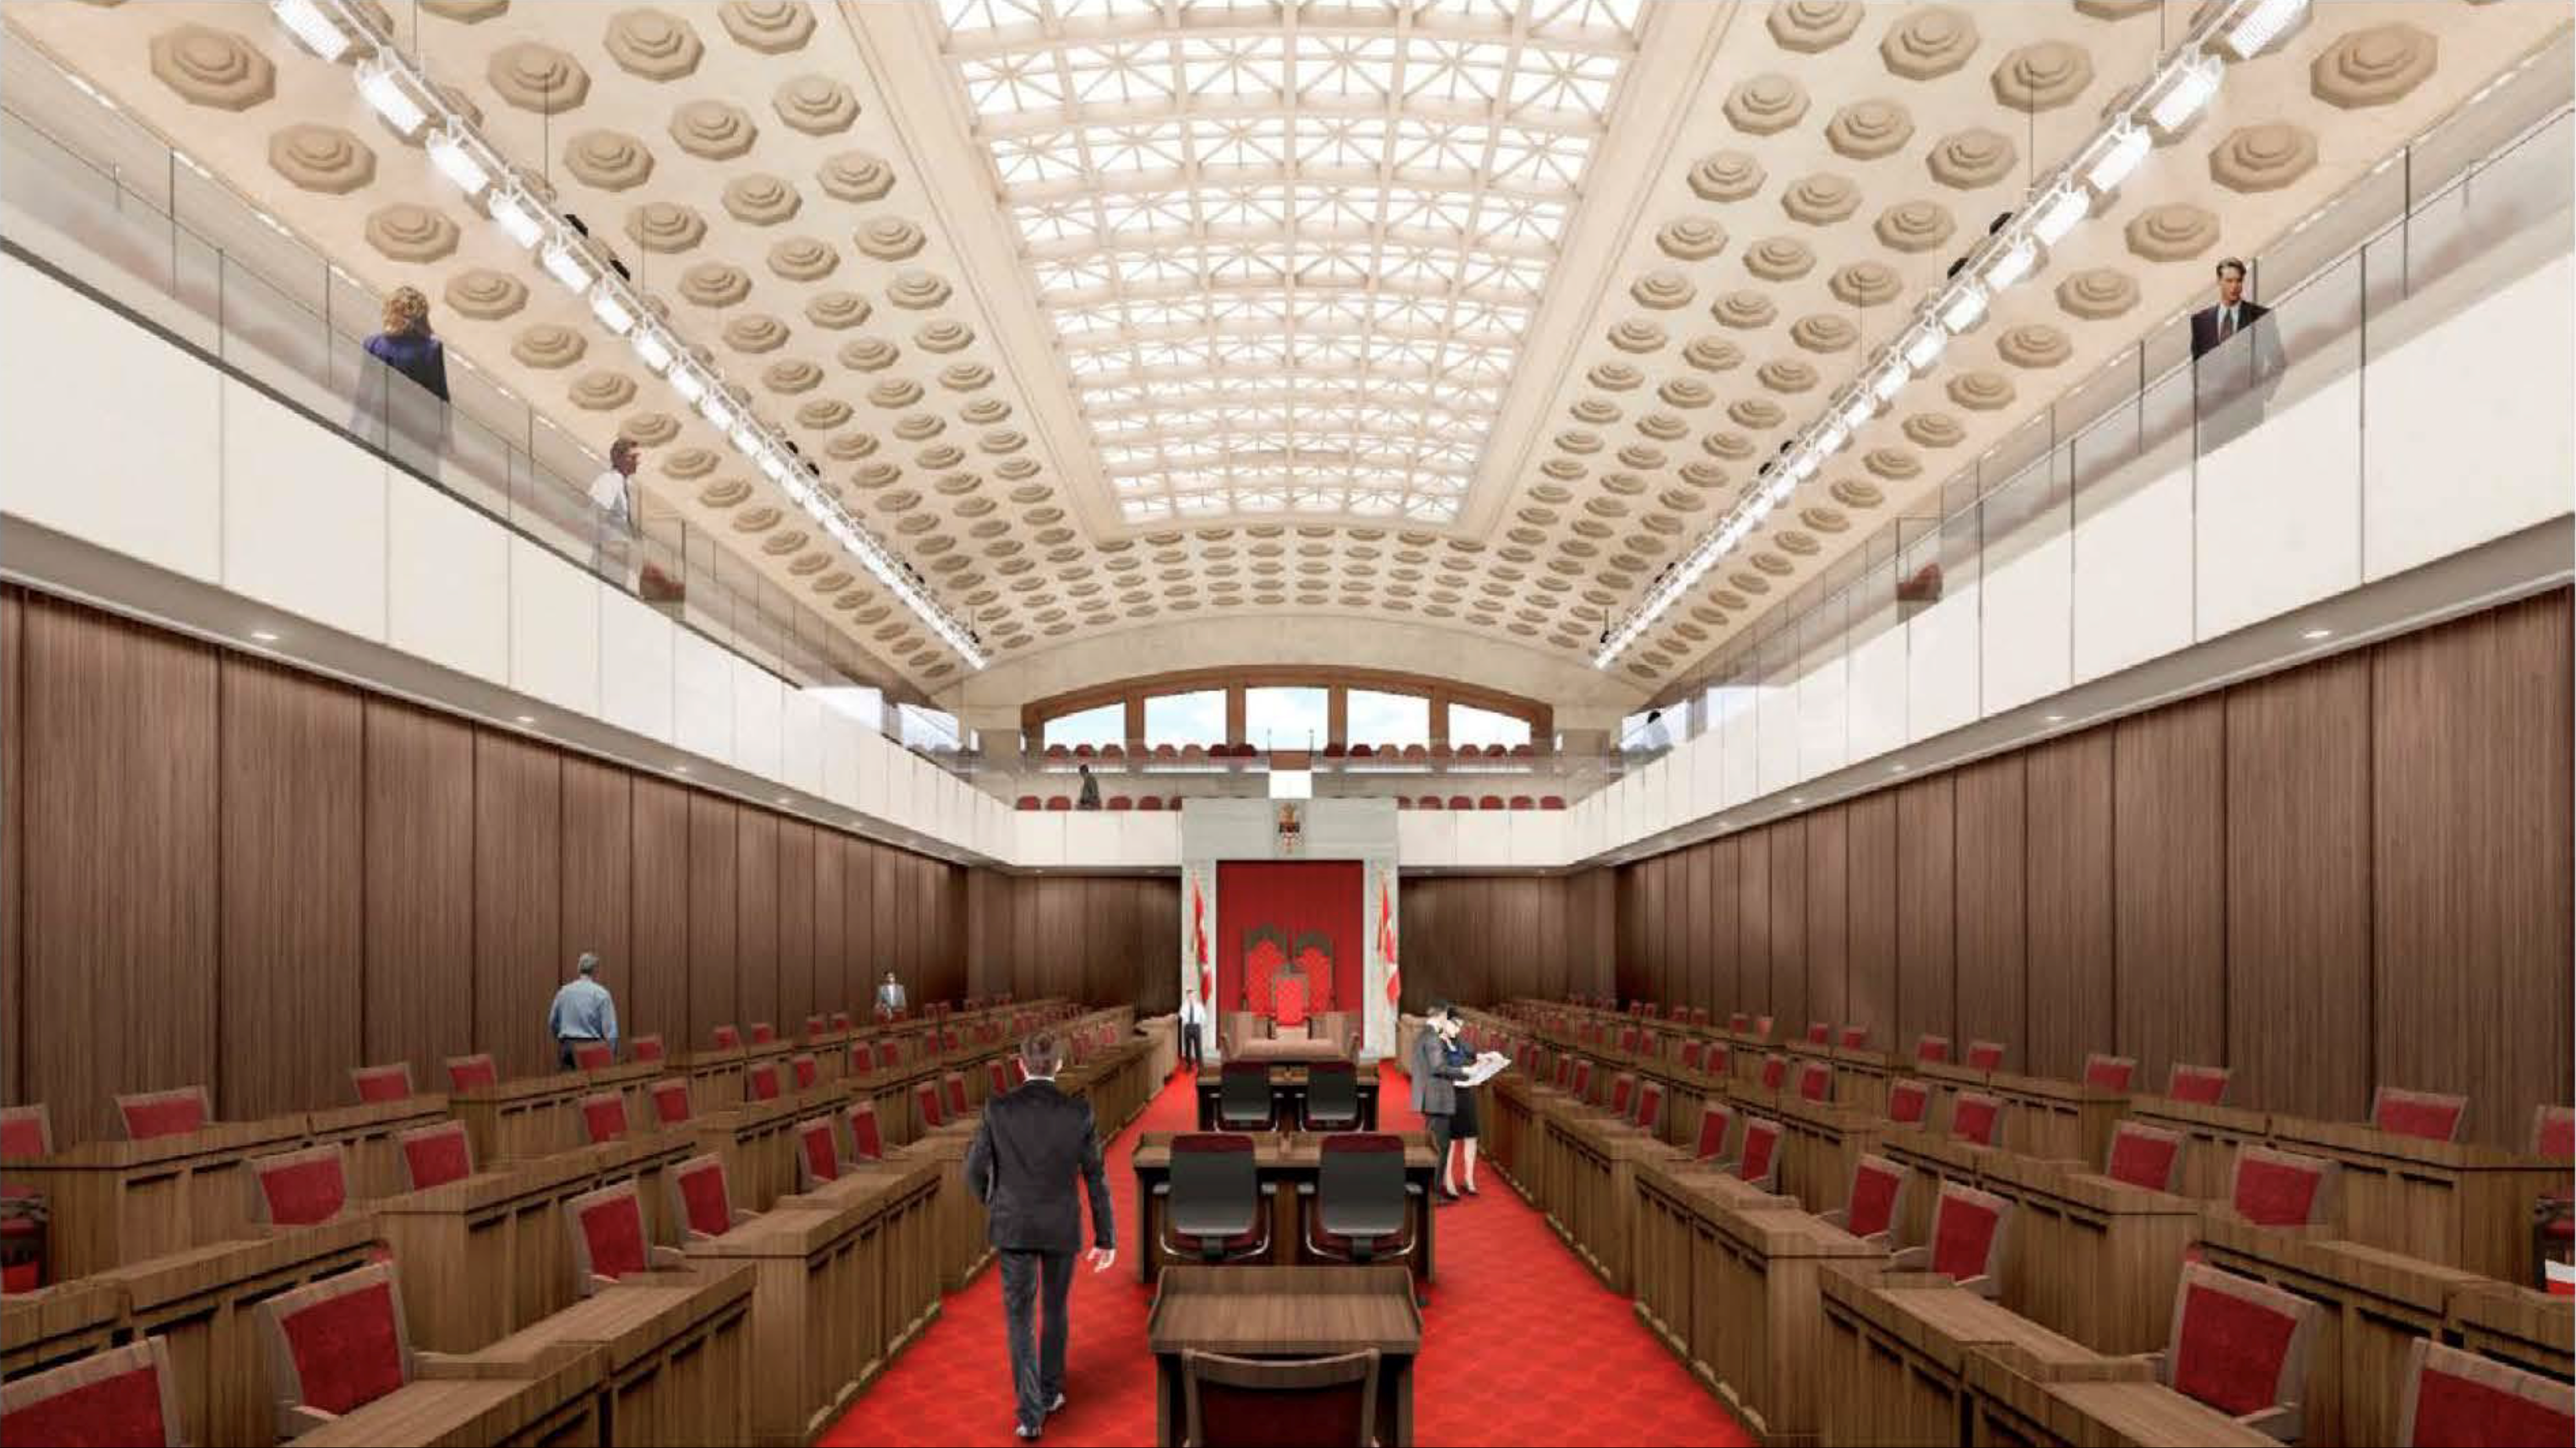 Adding modern information technology, communications, heating and cooling equipment to a 105-year-old building was one of the challenges architects had to overcome in designing a temporary home for the Senate.